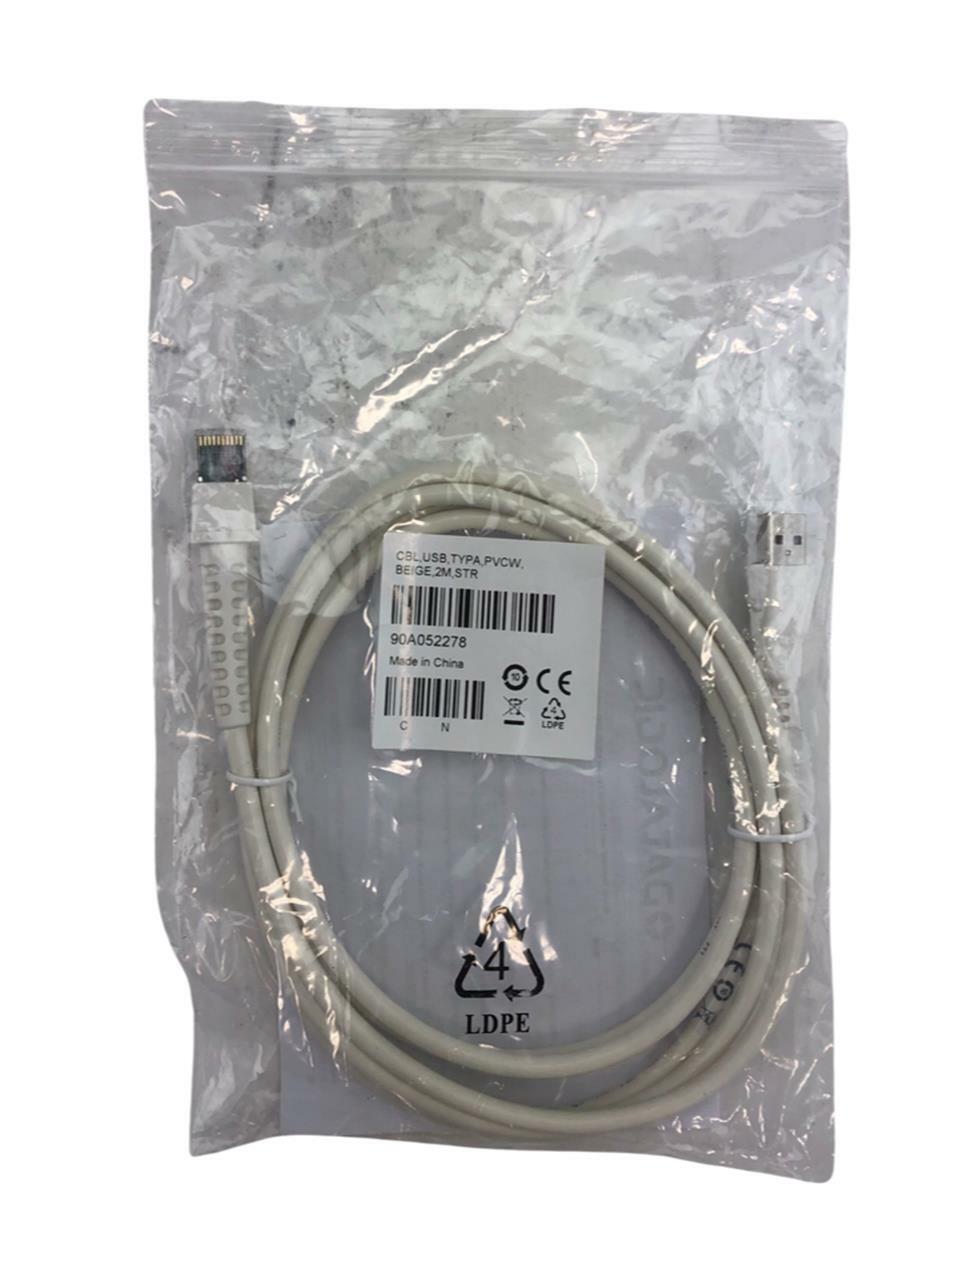 NEW - Datalogic Gryphon 90A052278 Scanner Type A 2M Cable